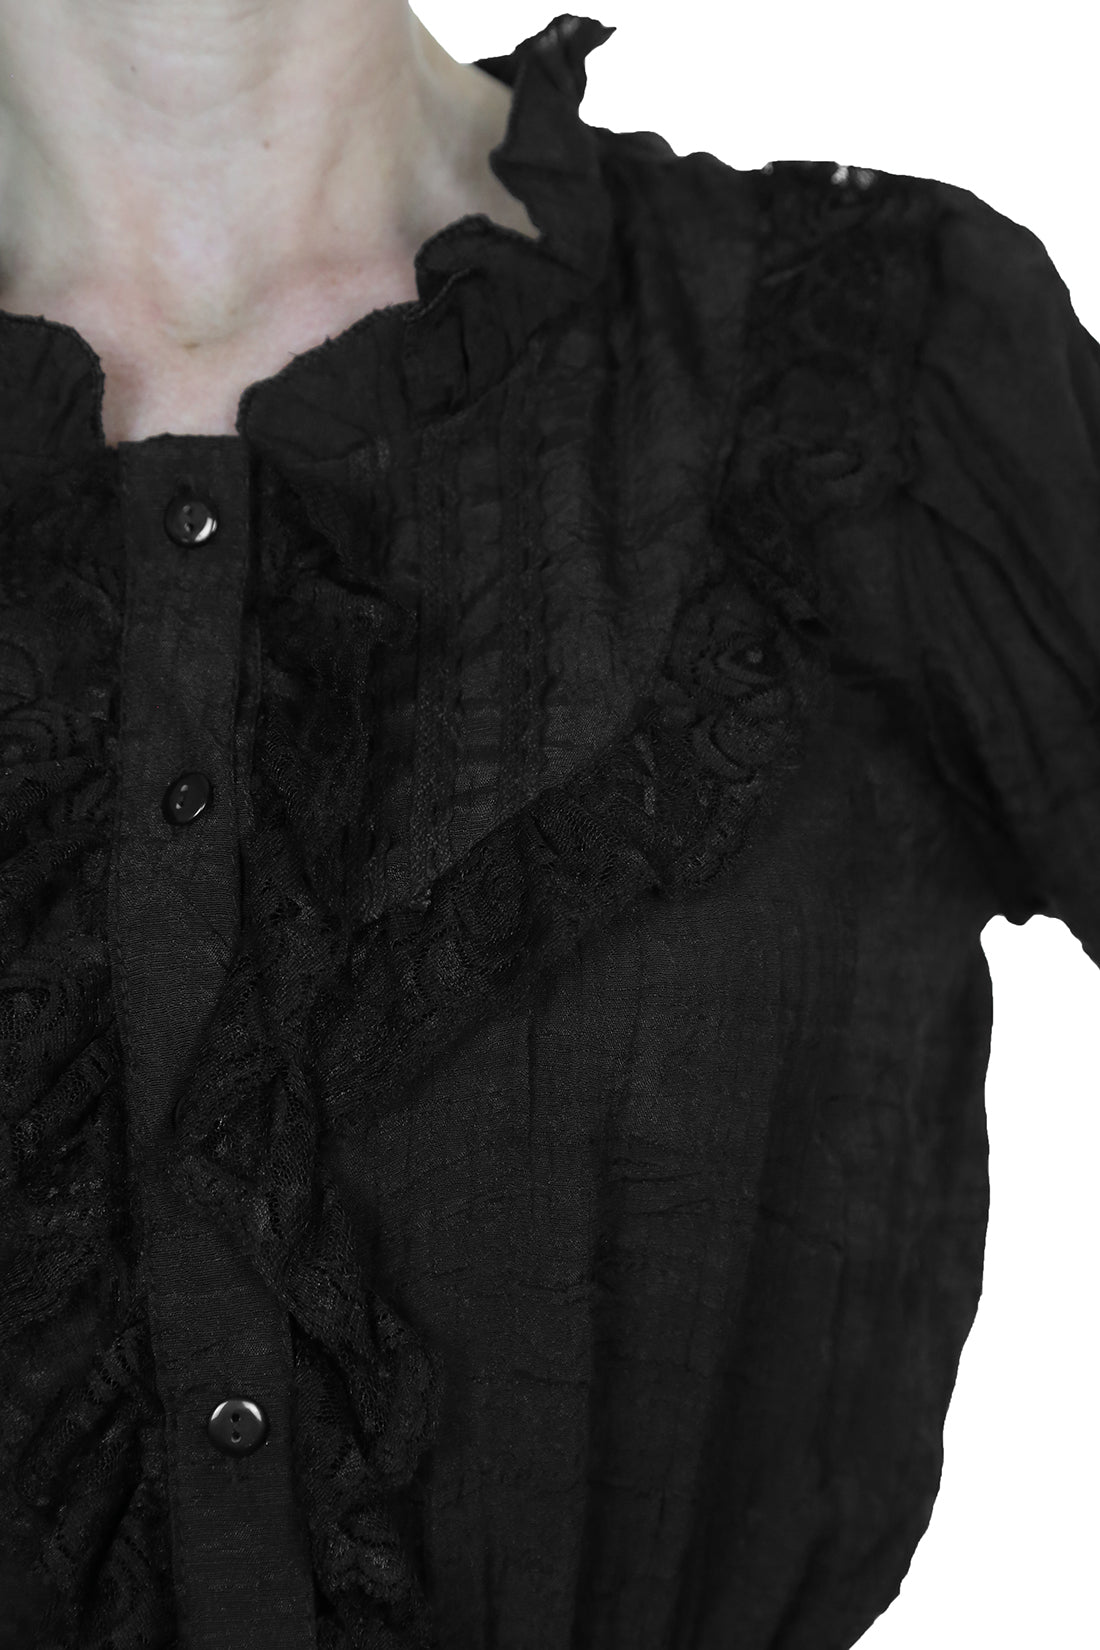 Romantic Style Tunic Shirt Top with Lace Black